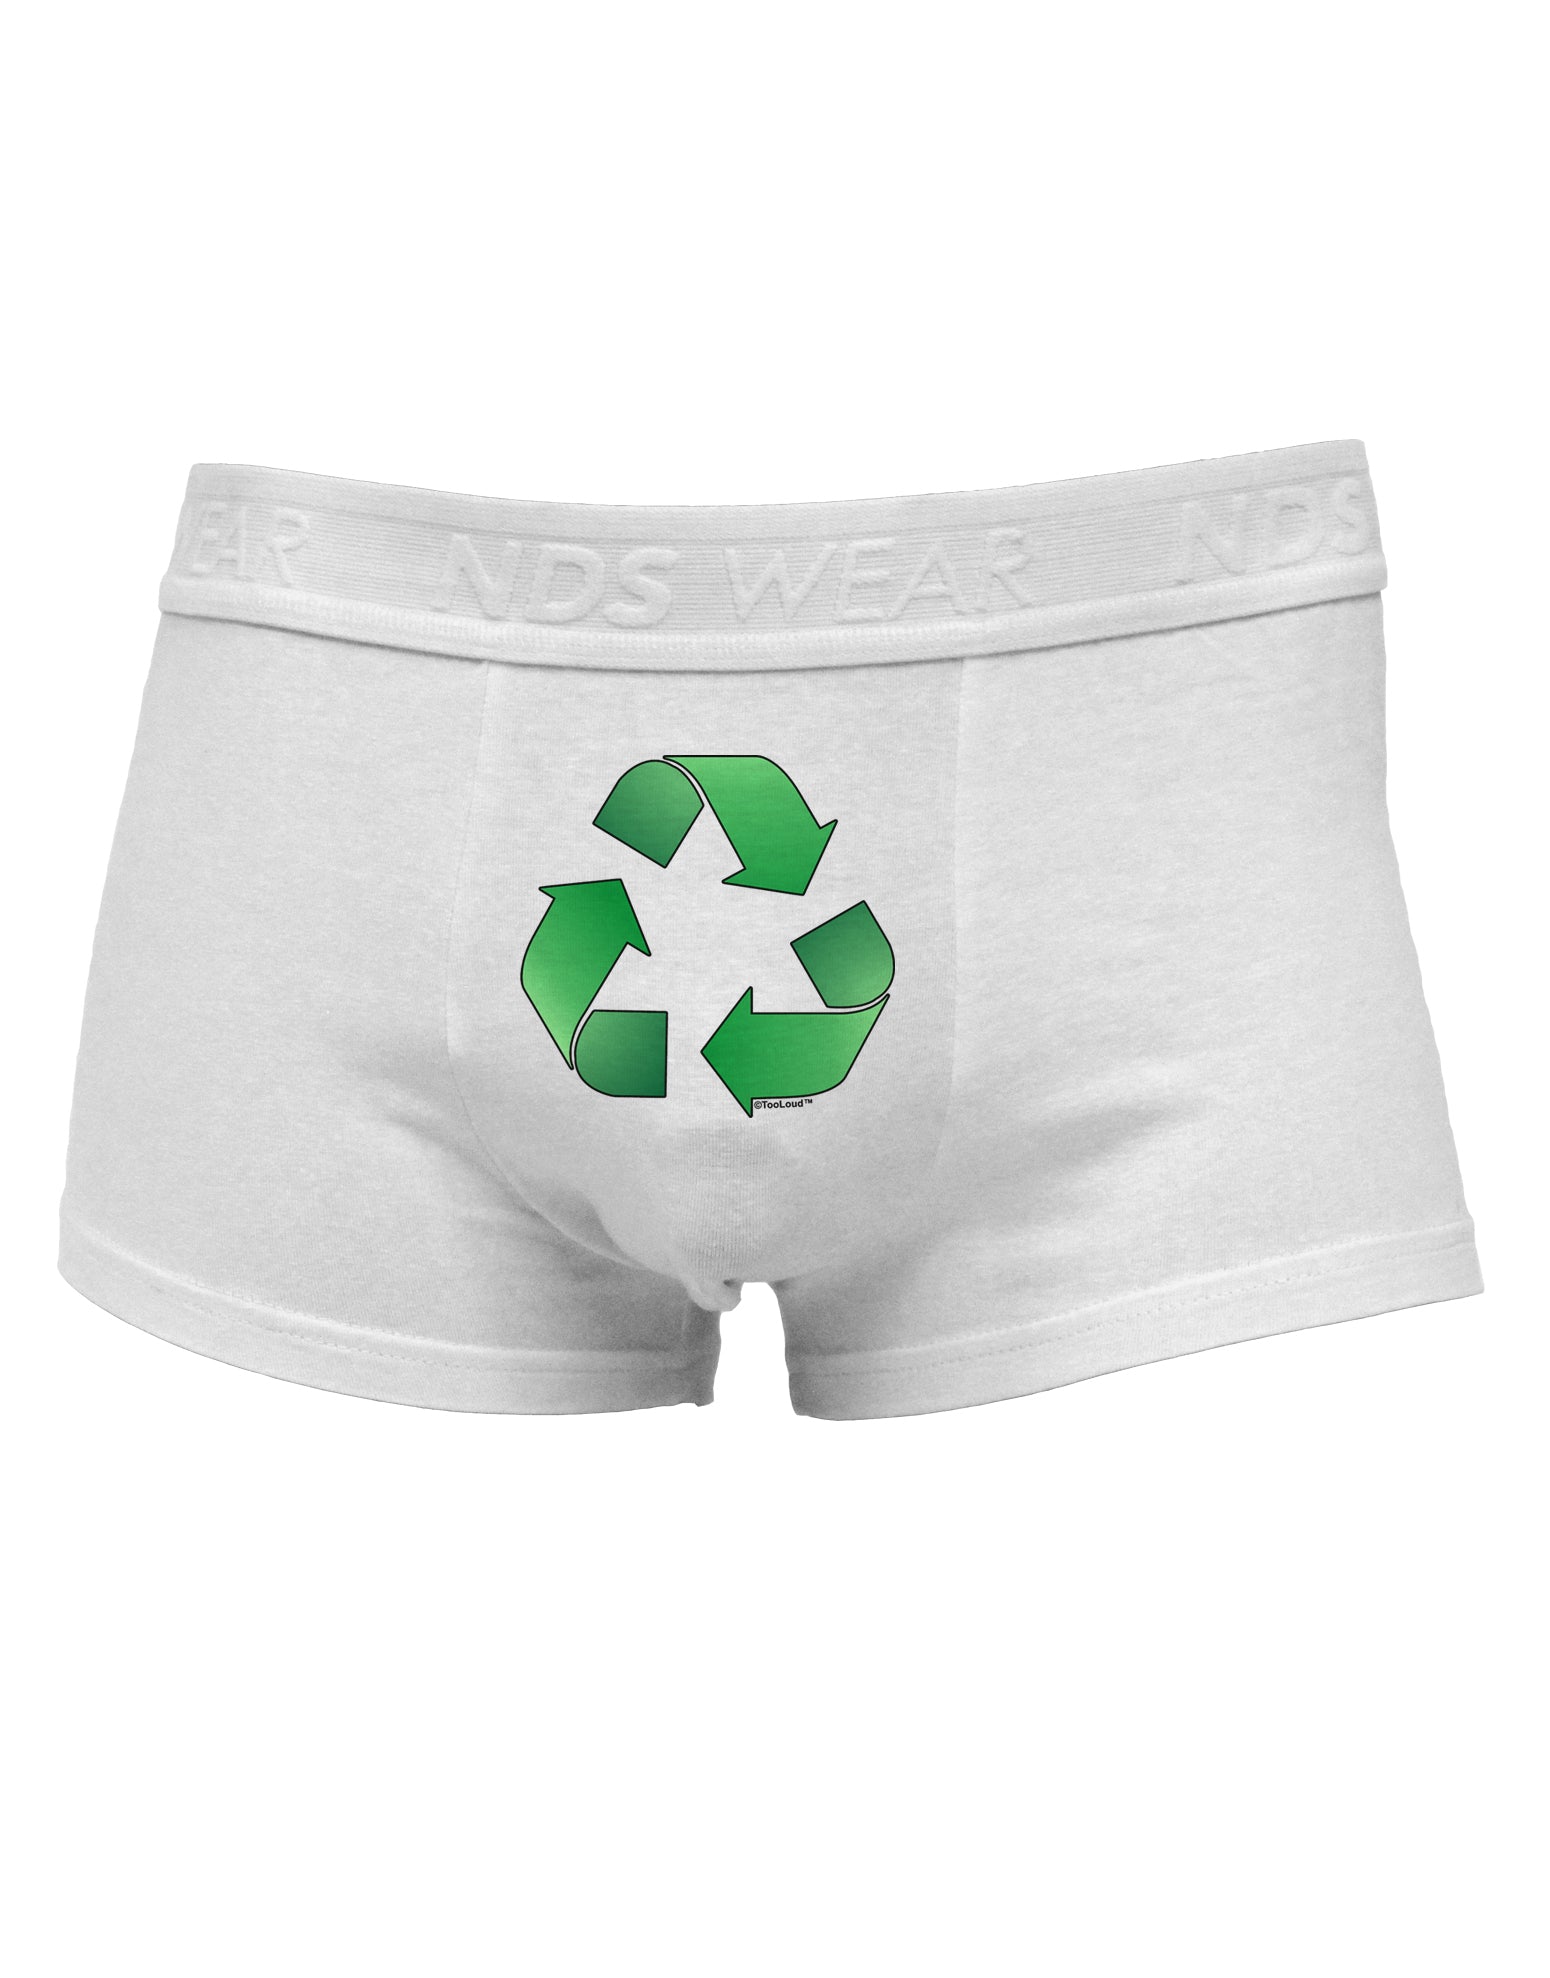 Recycle Green Mens Cotton Trunk Underwear by TooLoud